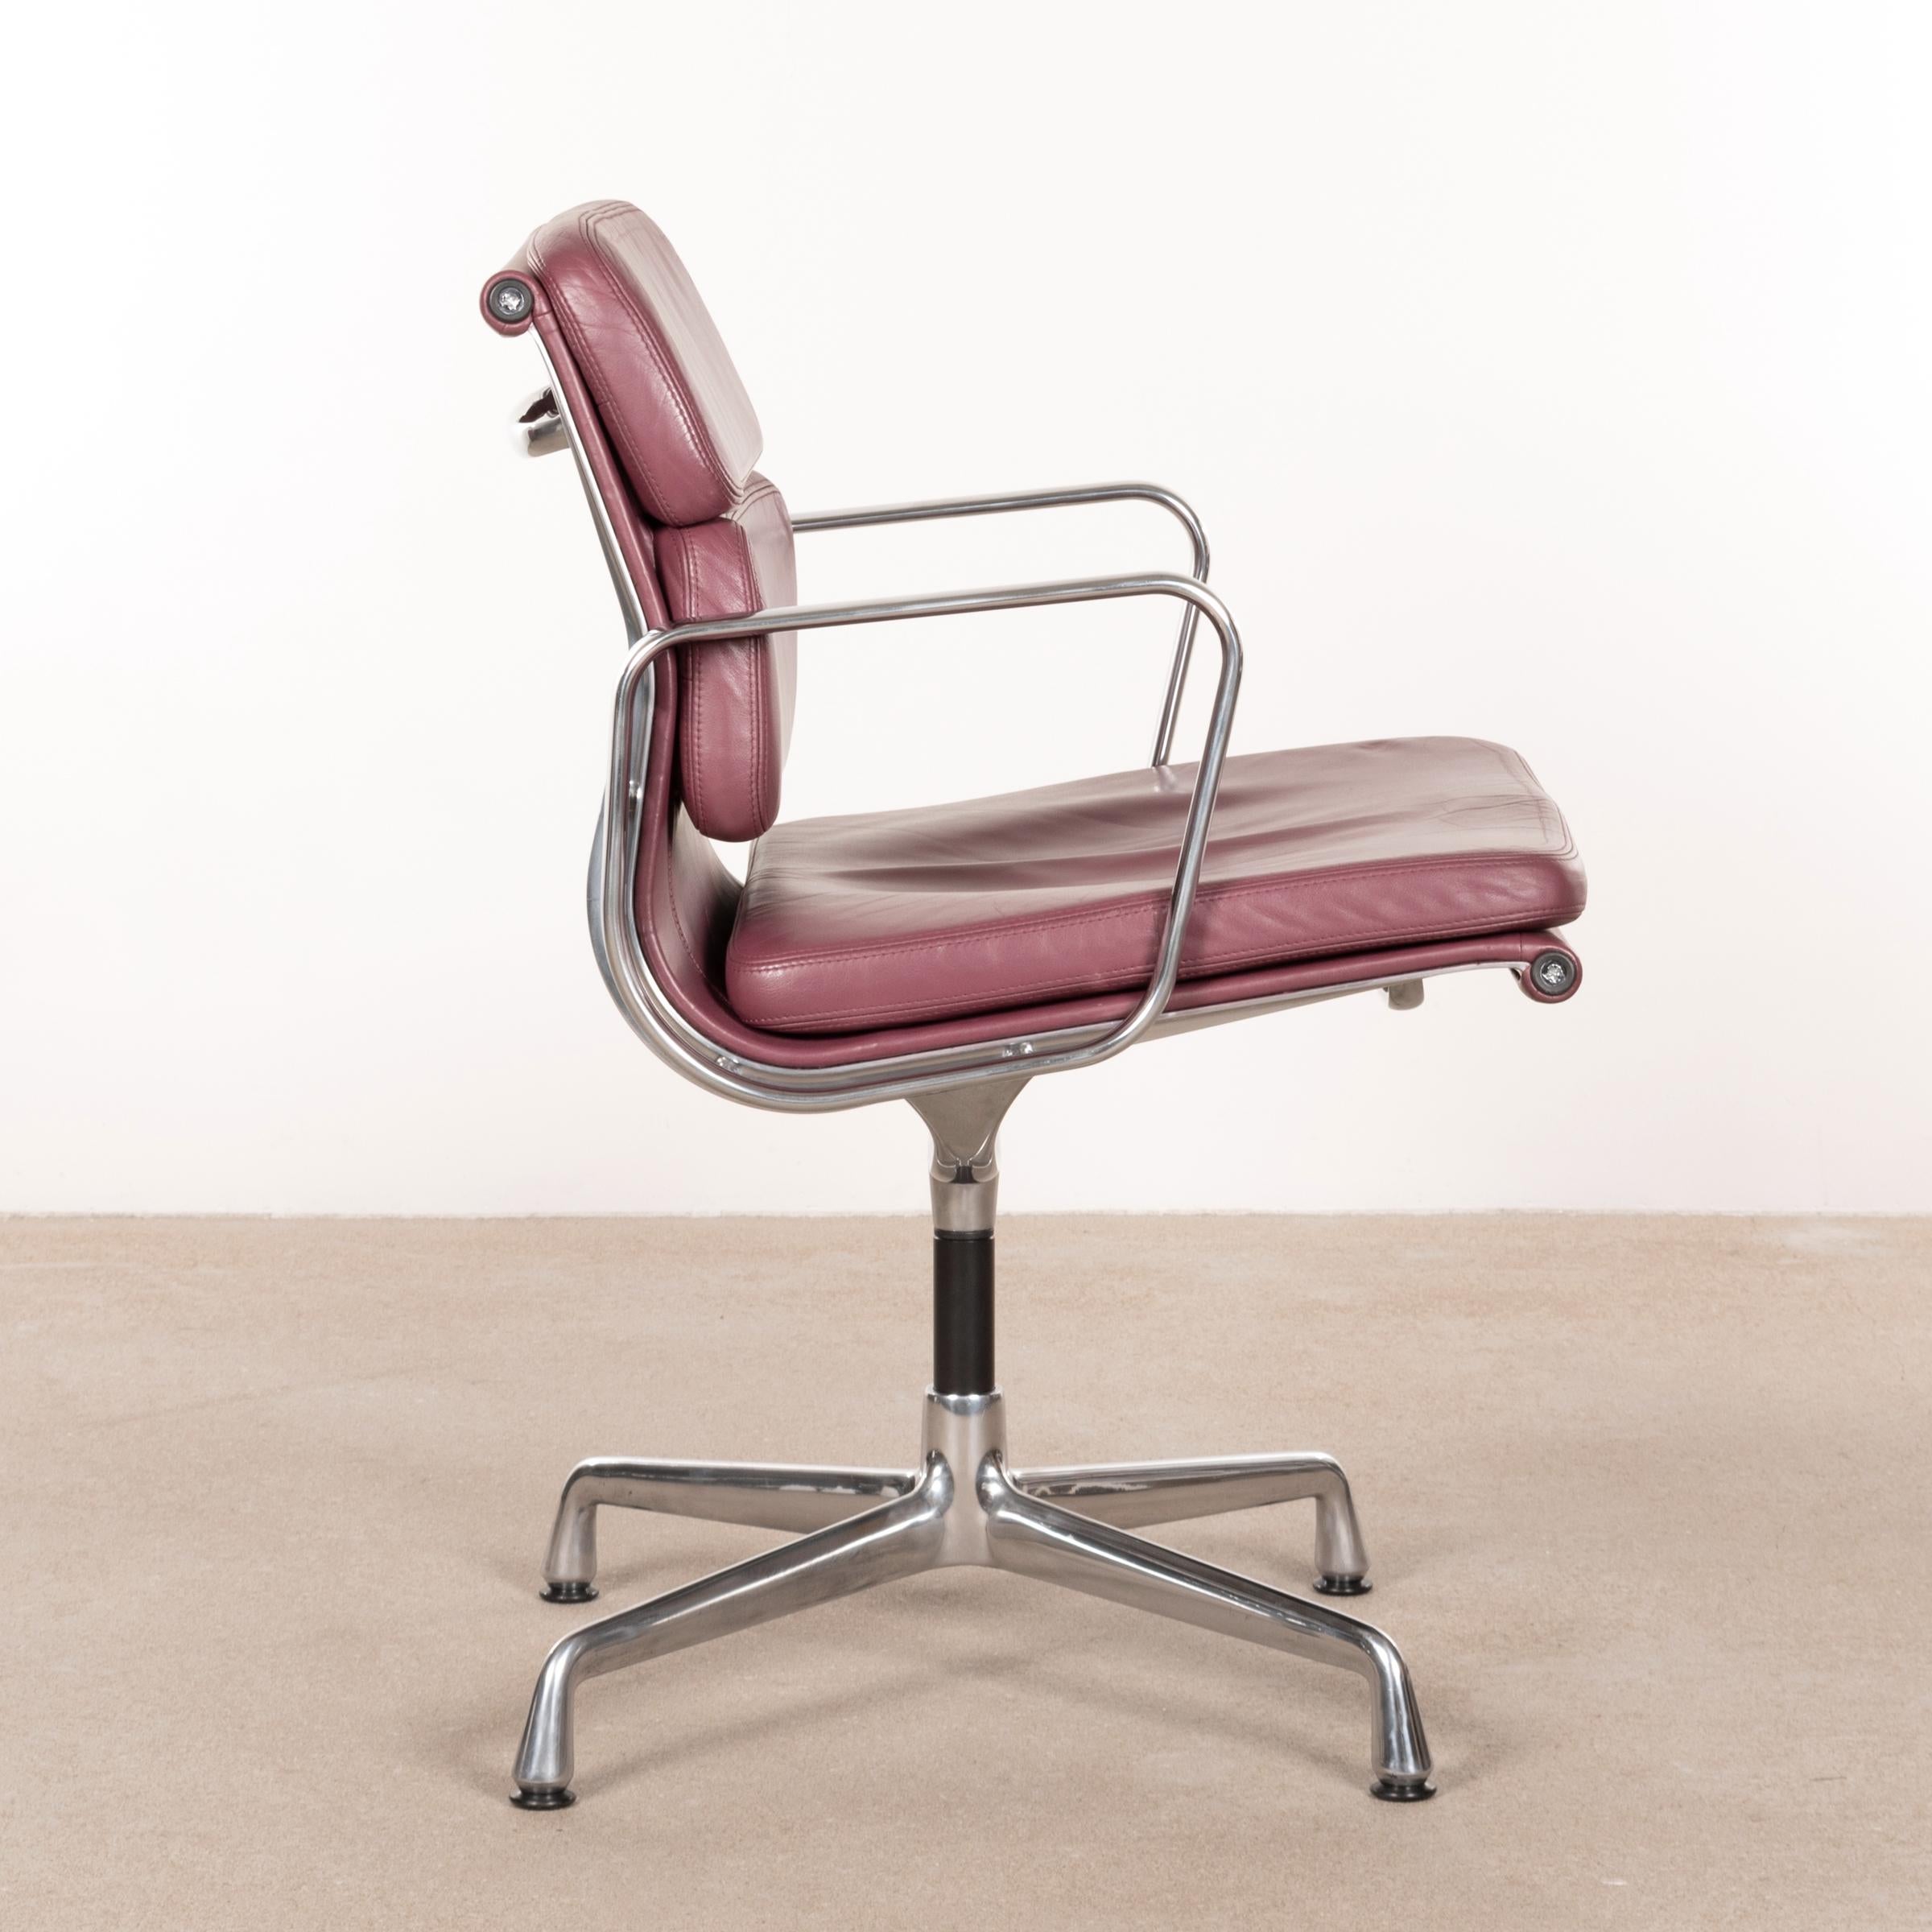 German Charles & Ray Eames EA208 Soft Pad Chair in Aubergine / Purple leather by Vitra